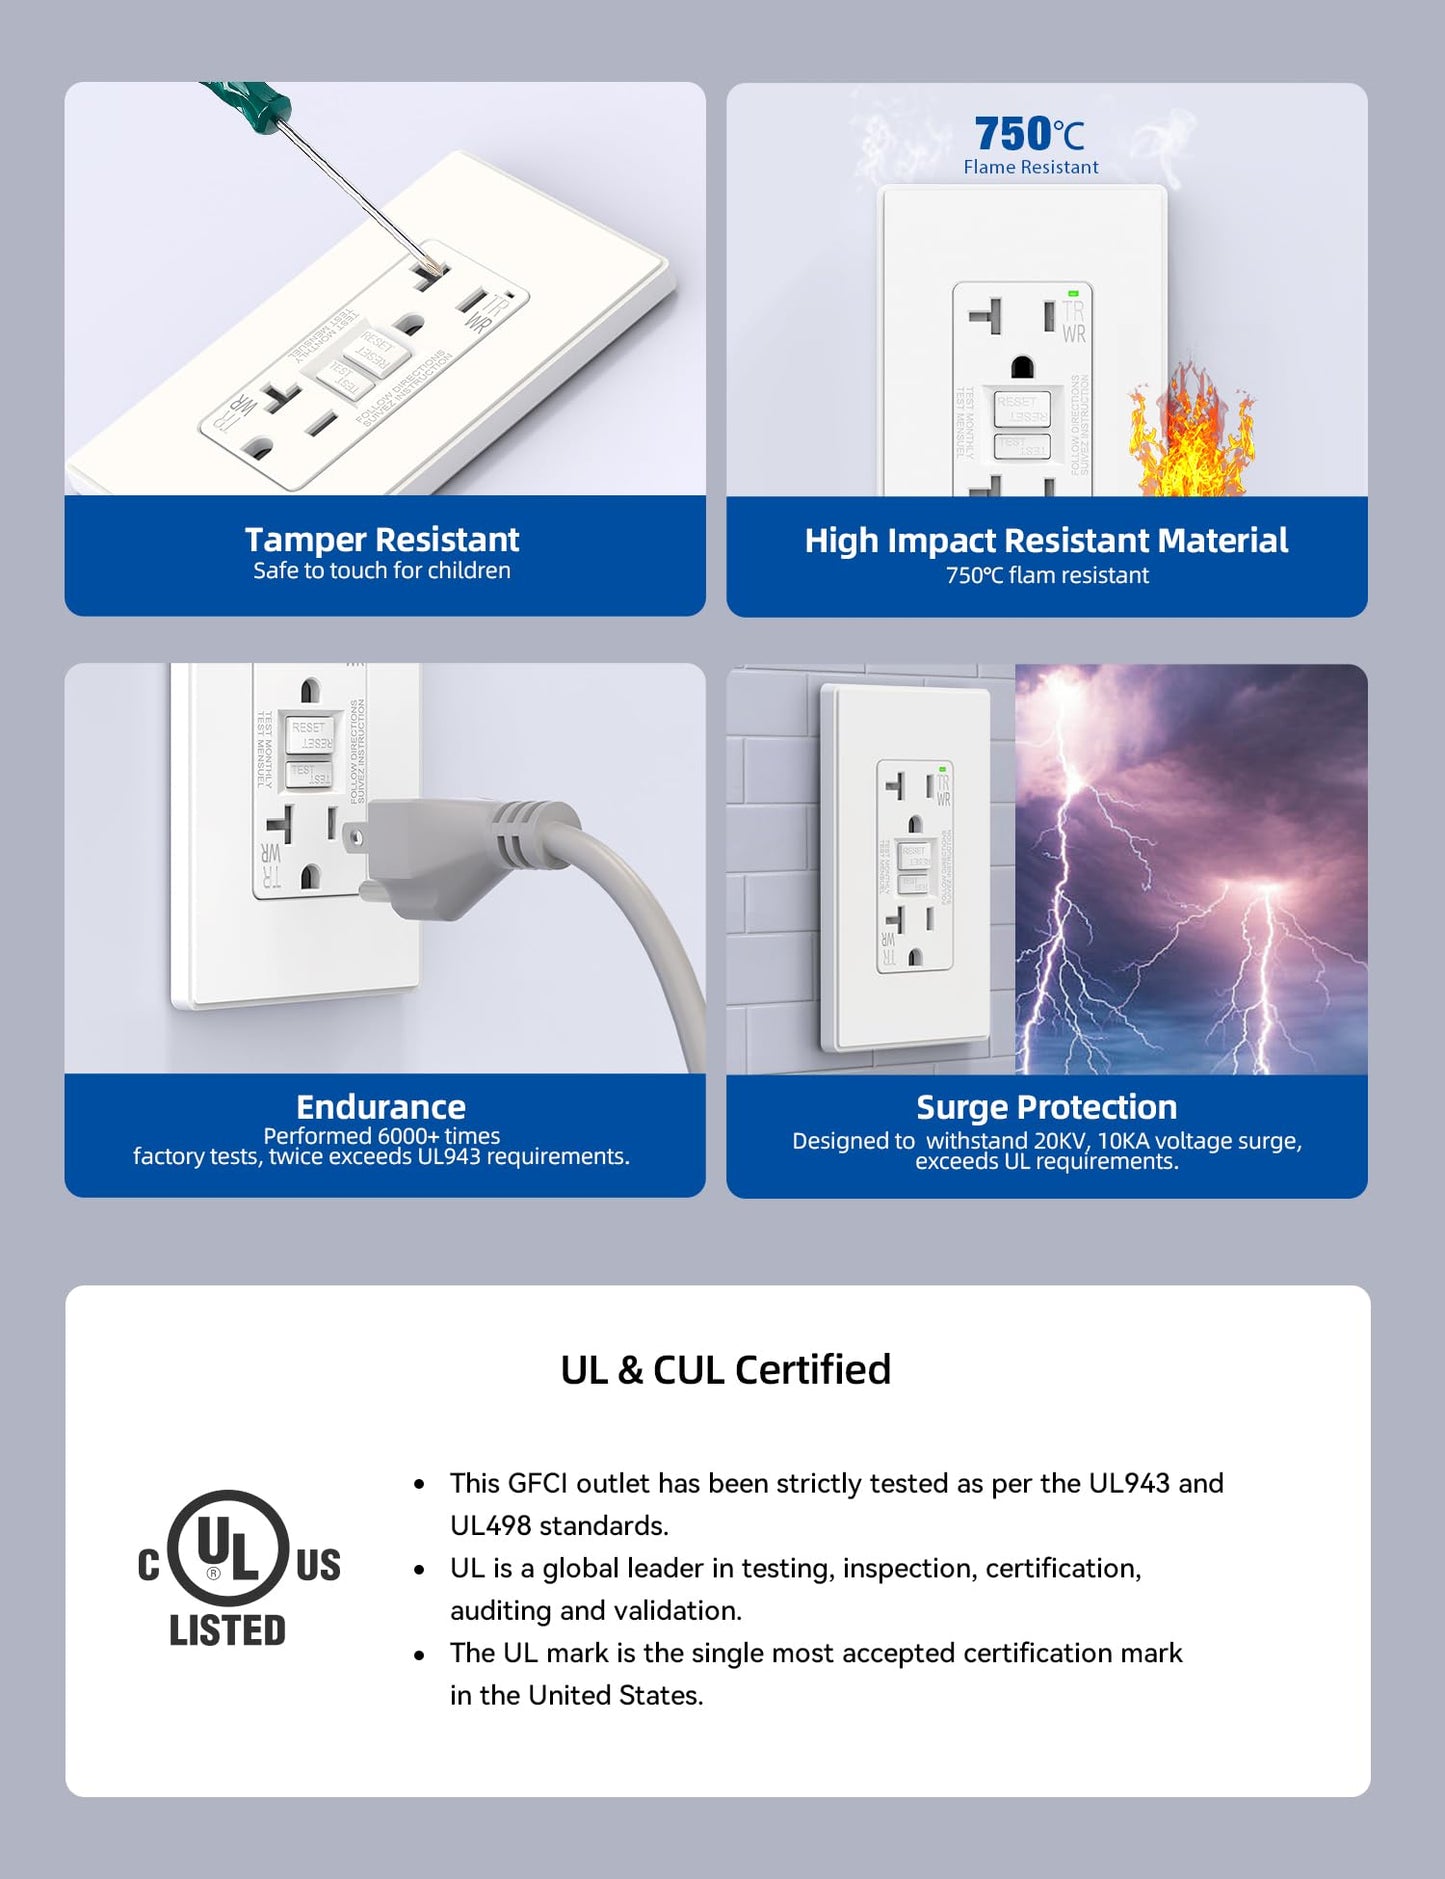 ELEGRP GFCI Outlet Outdoor, Self-Test GFI Electrical Outlet with Thinner Design, Weather & Tamper Resistant GFCI Receptacle, Ground Fault Receptacle w/Wall Plate, UL Listed